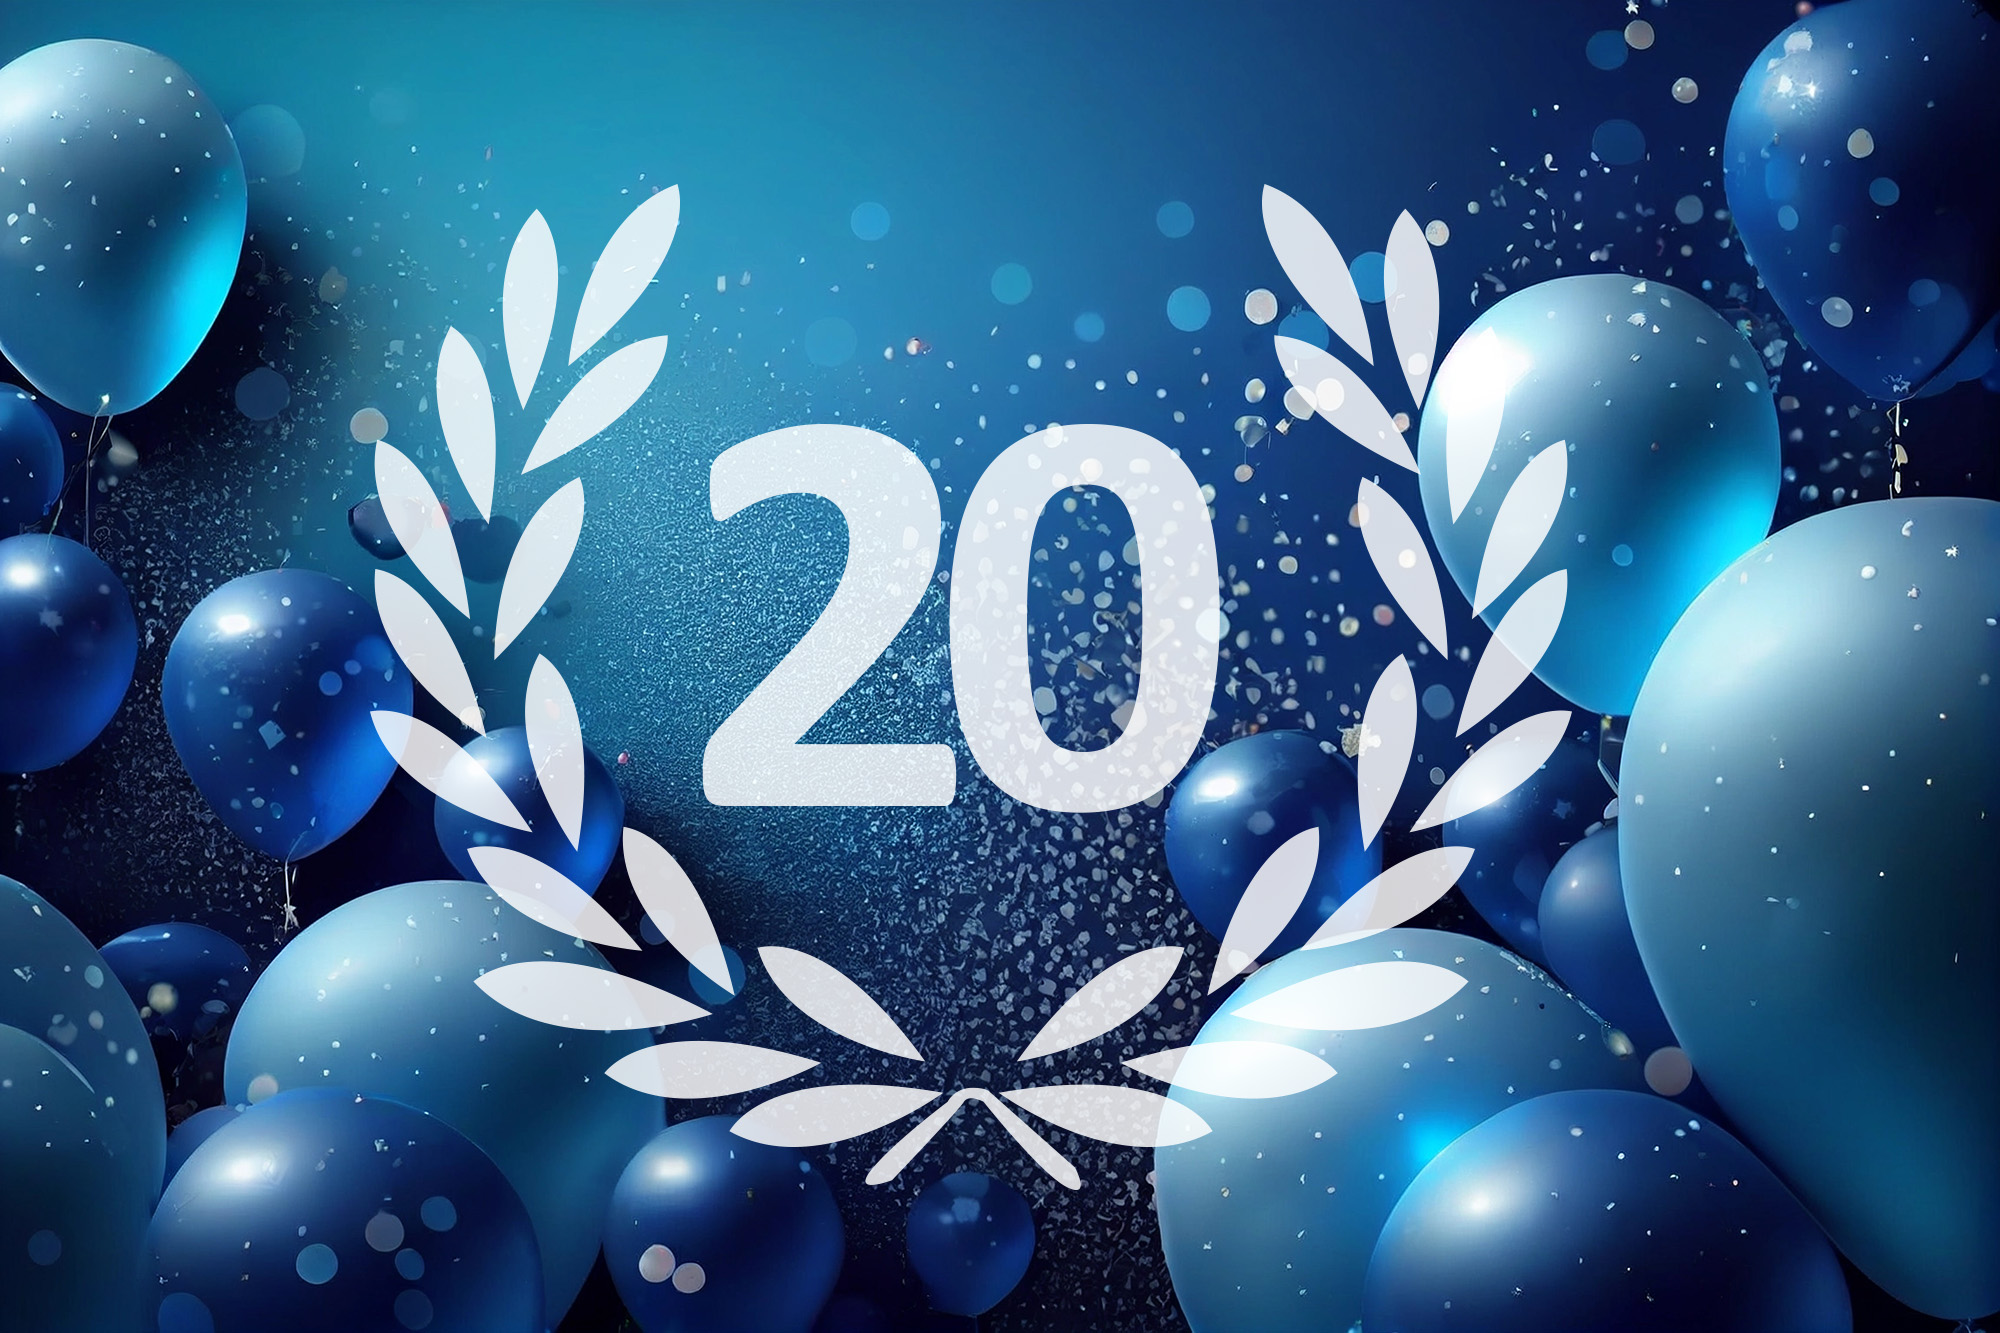 An anniversary graphic with the number 20. This is surrounded by a laurel wreath and blue balloons, all in a sparkling blue atmosphere.